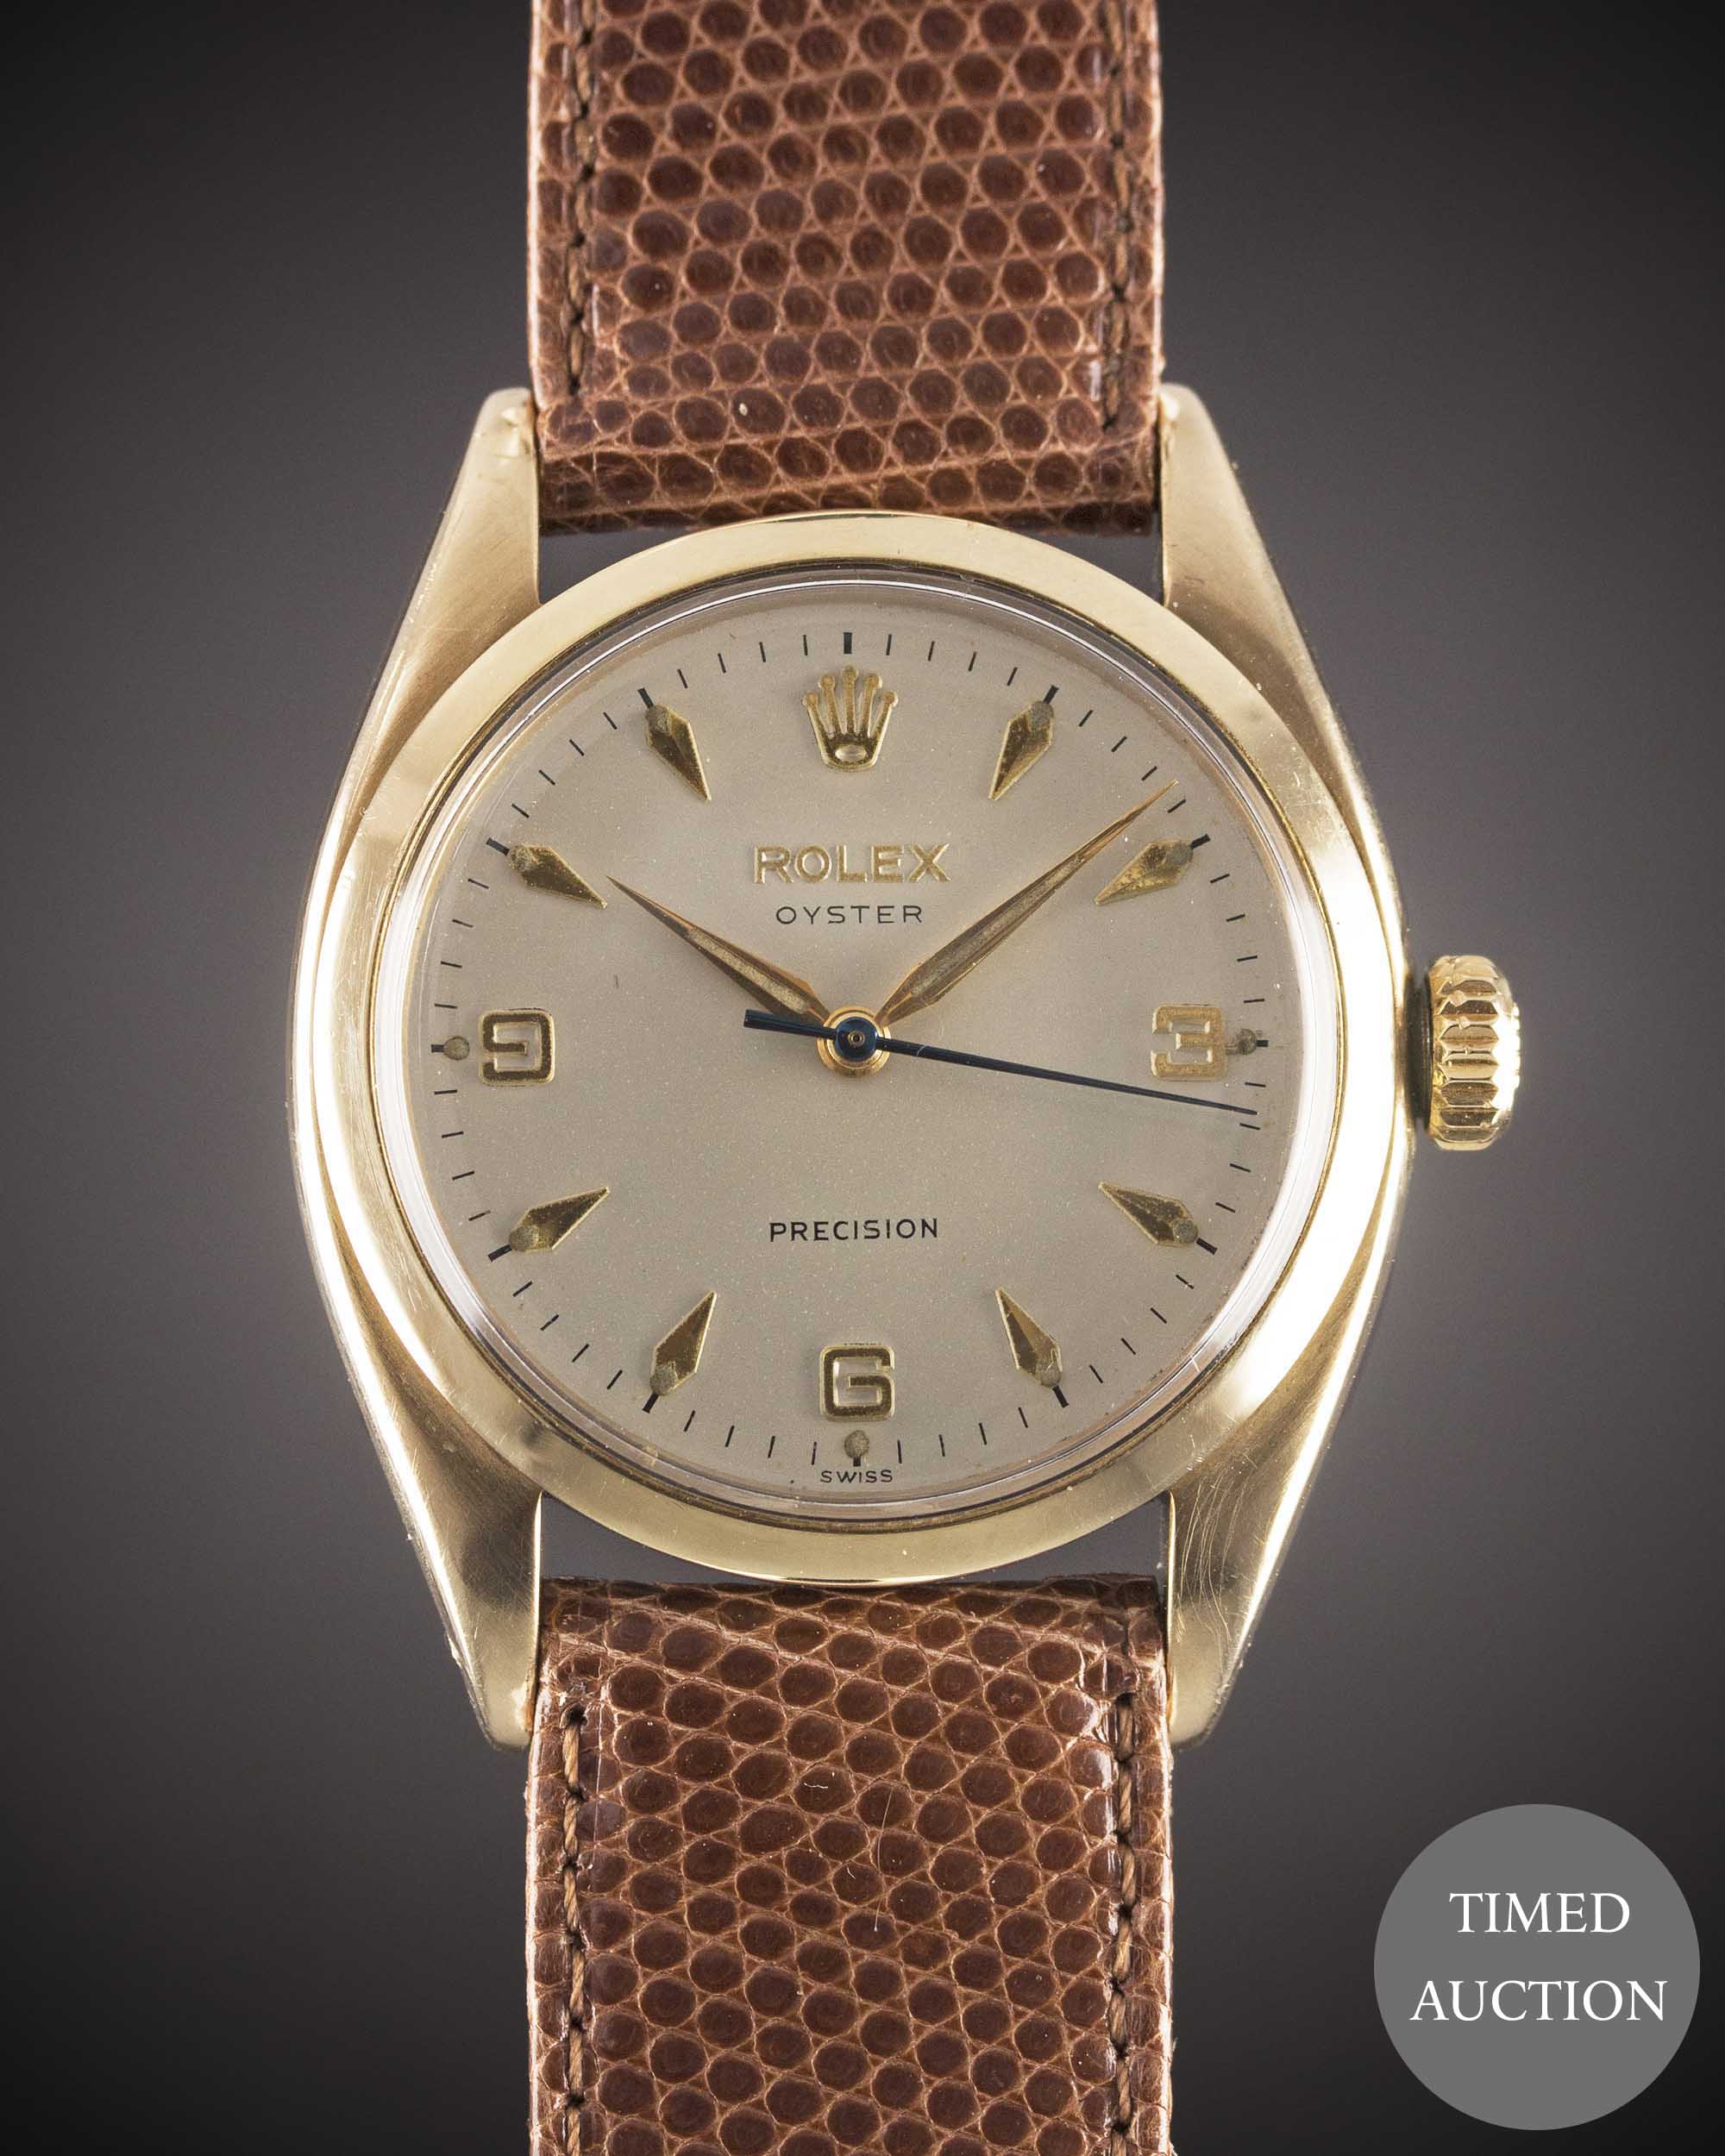 A GENTLEMAN'S 9CT SOLID GOLD ROLEX OYSTER PRECISION WRIST WATCH CIRCA 1959, REF. 6426 WITH 3-6-9 "